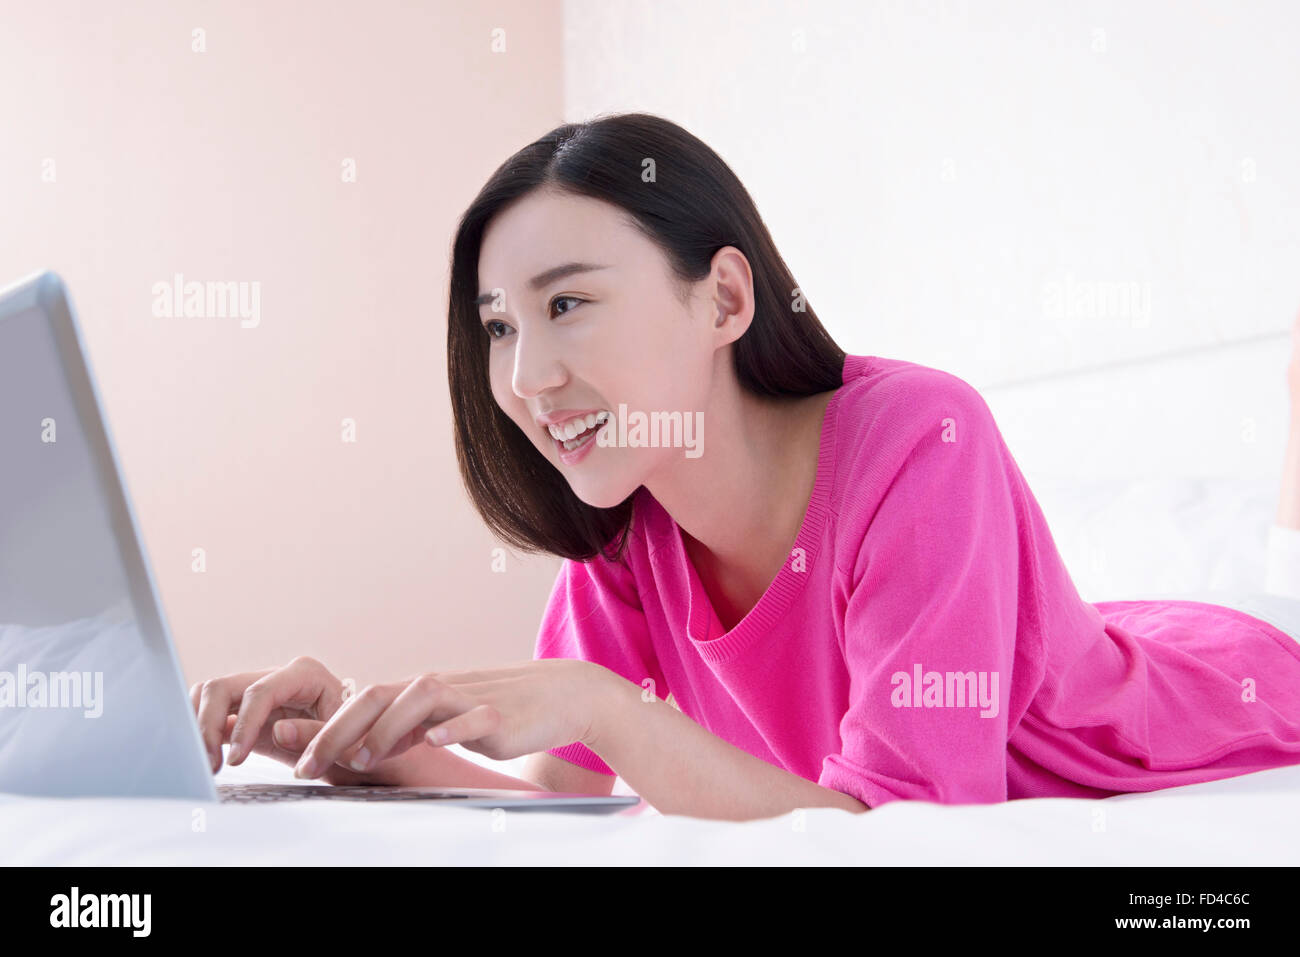 Young woman using laptop in bed Stock Photo